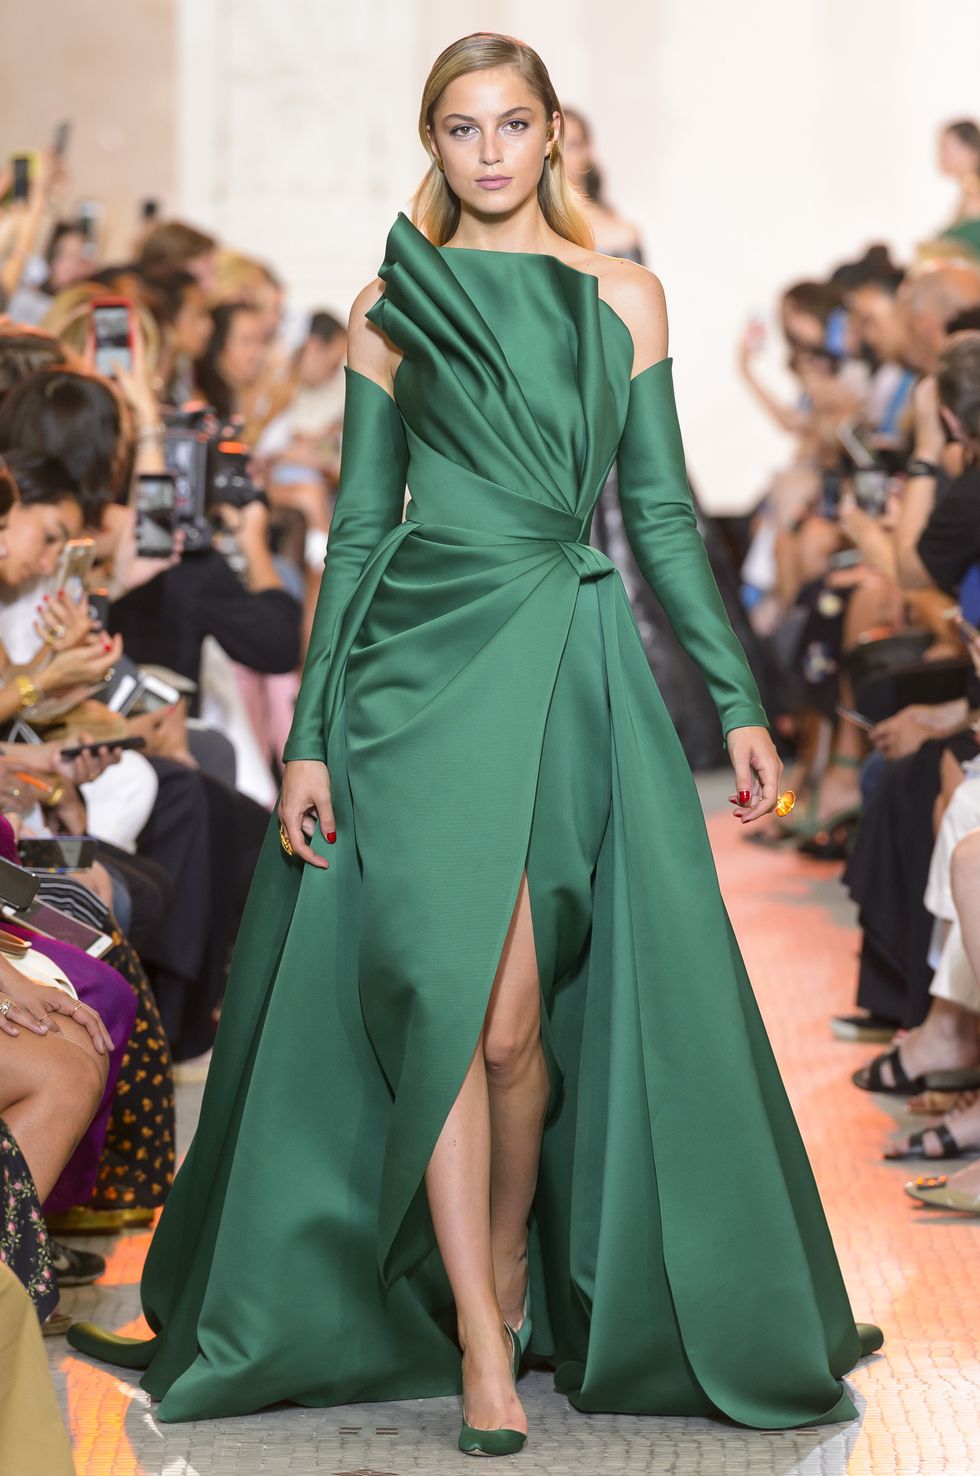 Elie Saab Haute Couture Fall Winter 2018/19